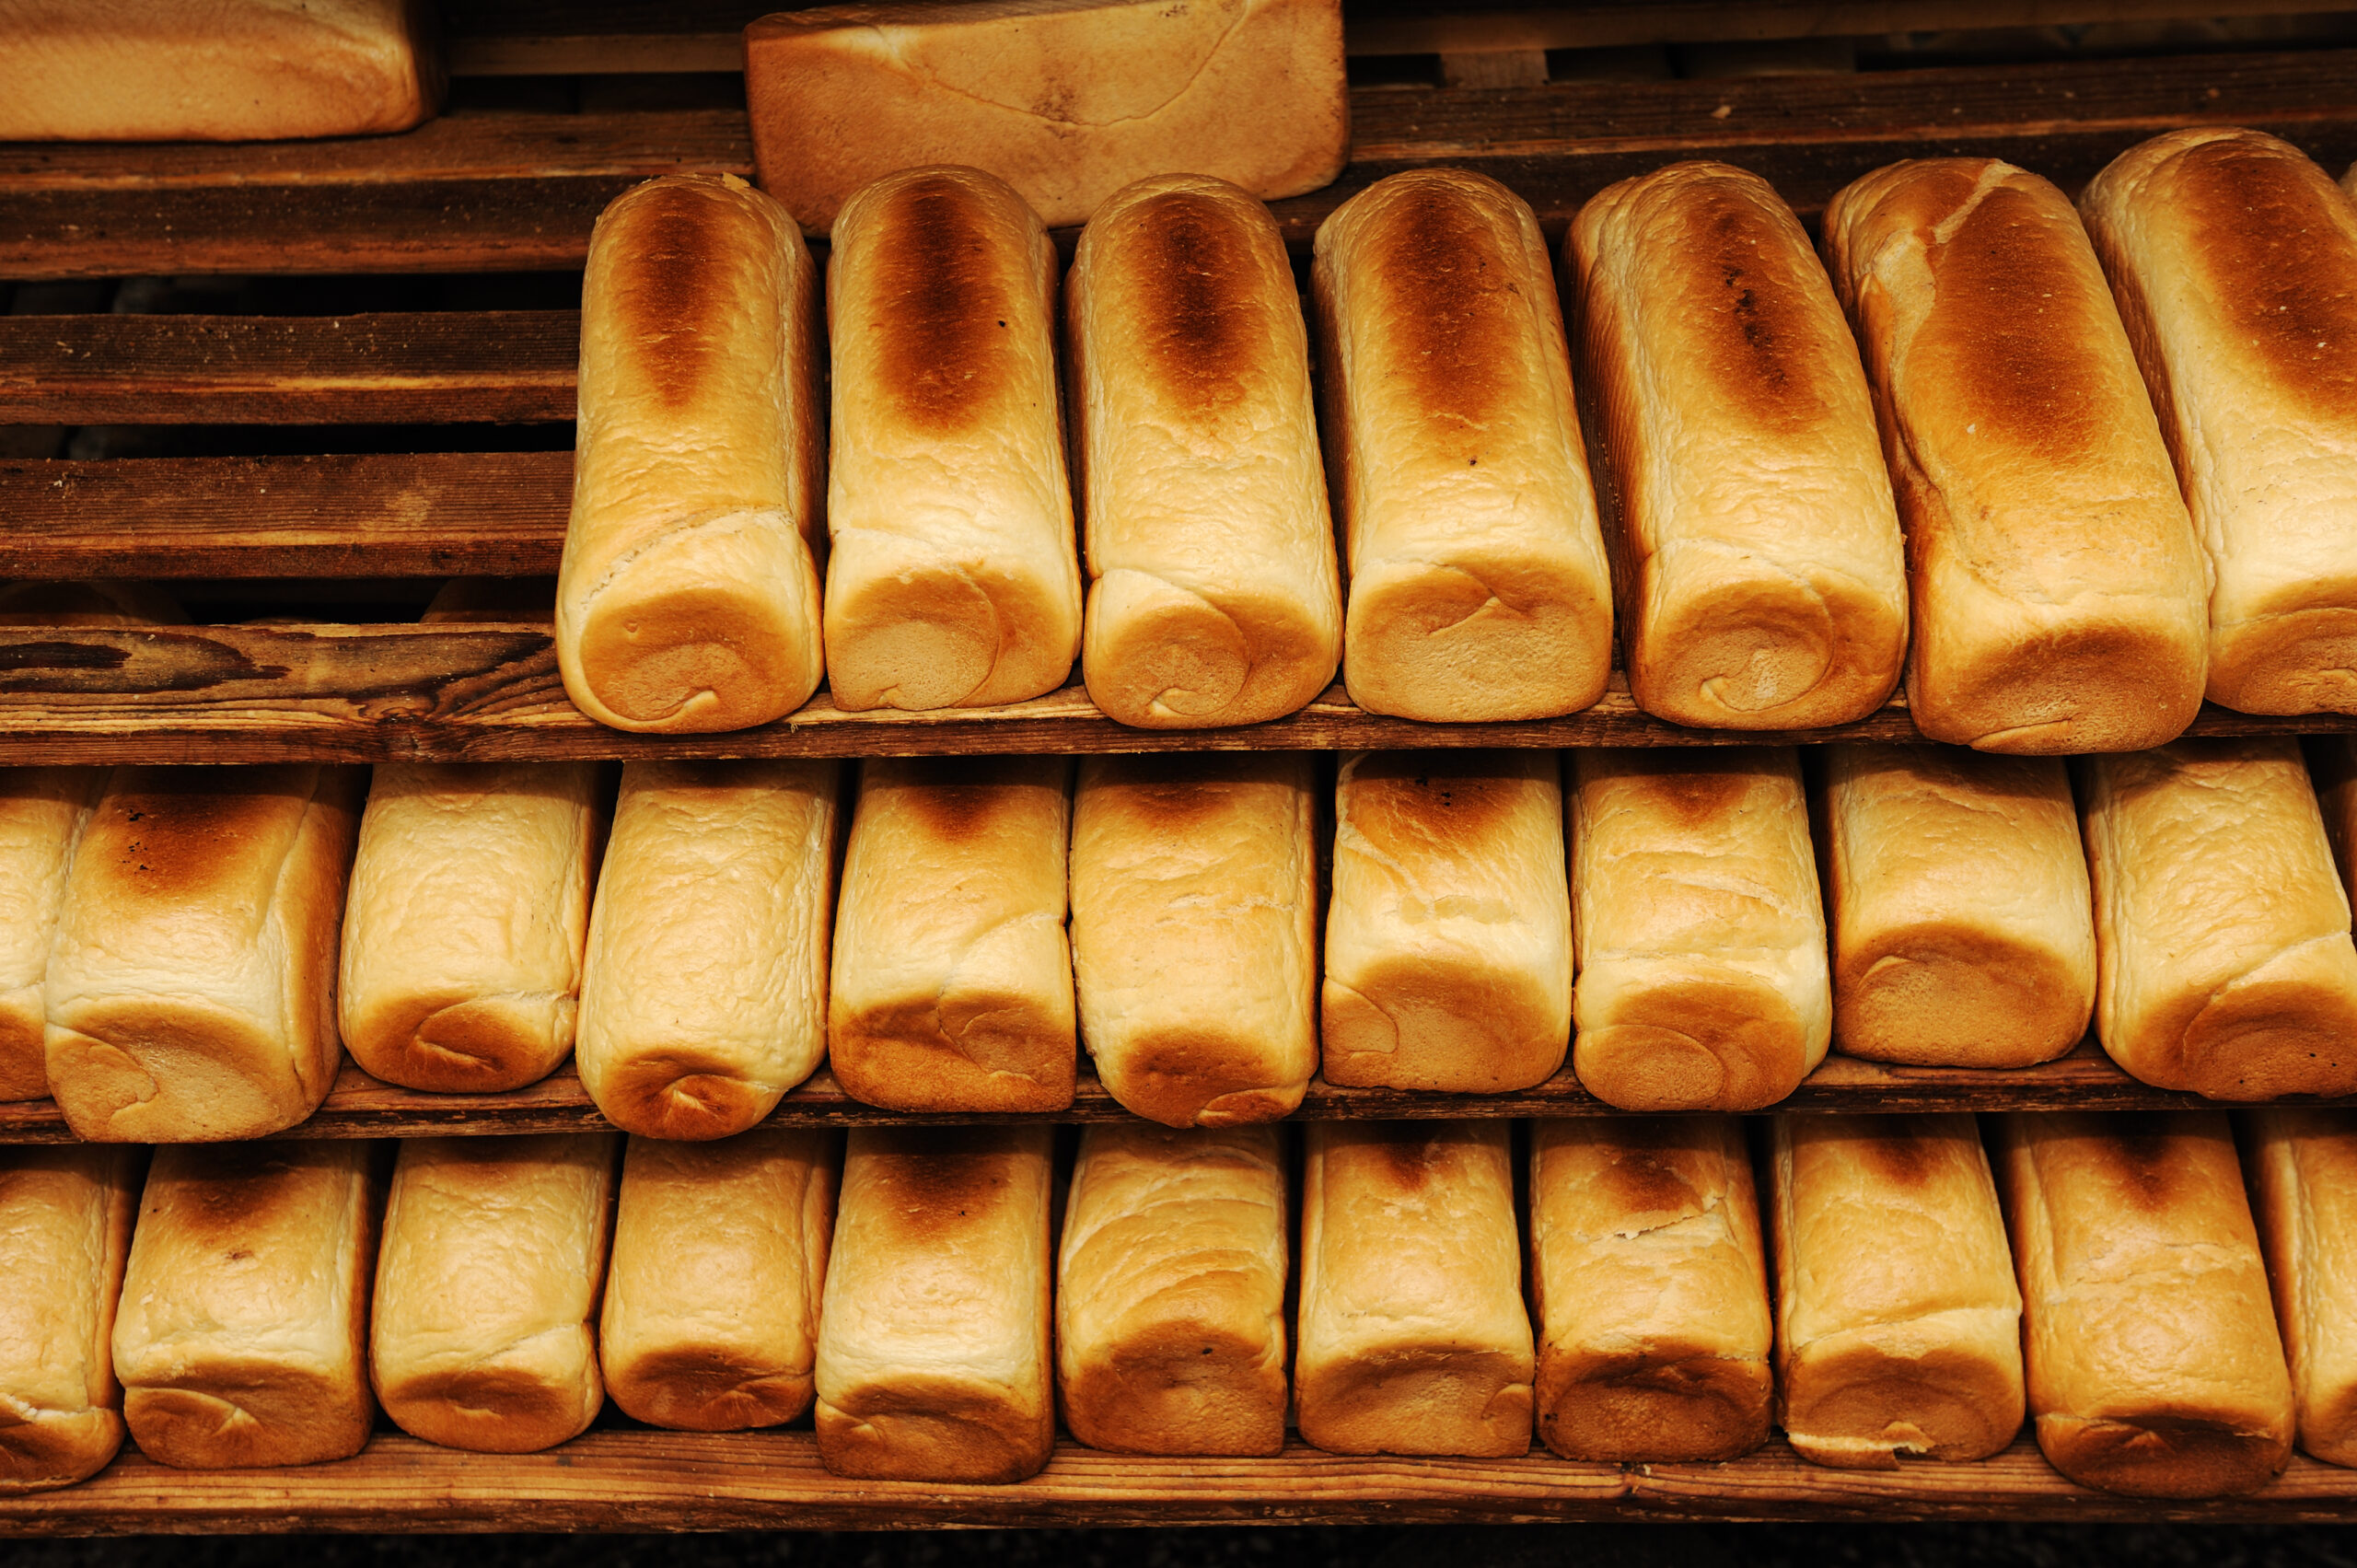 several loaves of bread are lined up on a wooden shelf